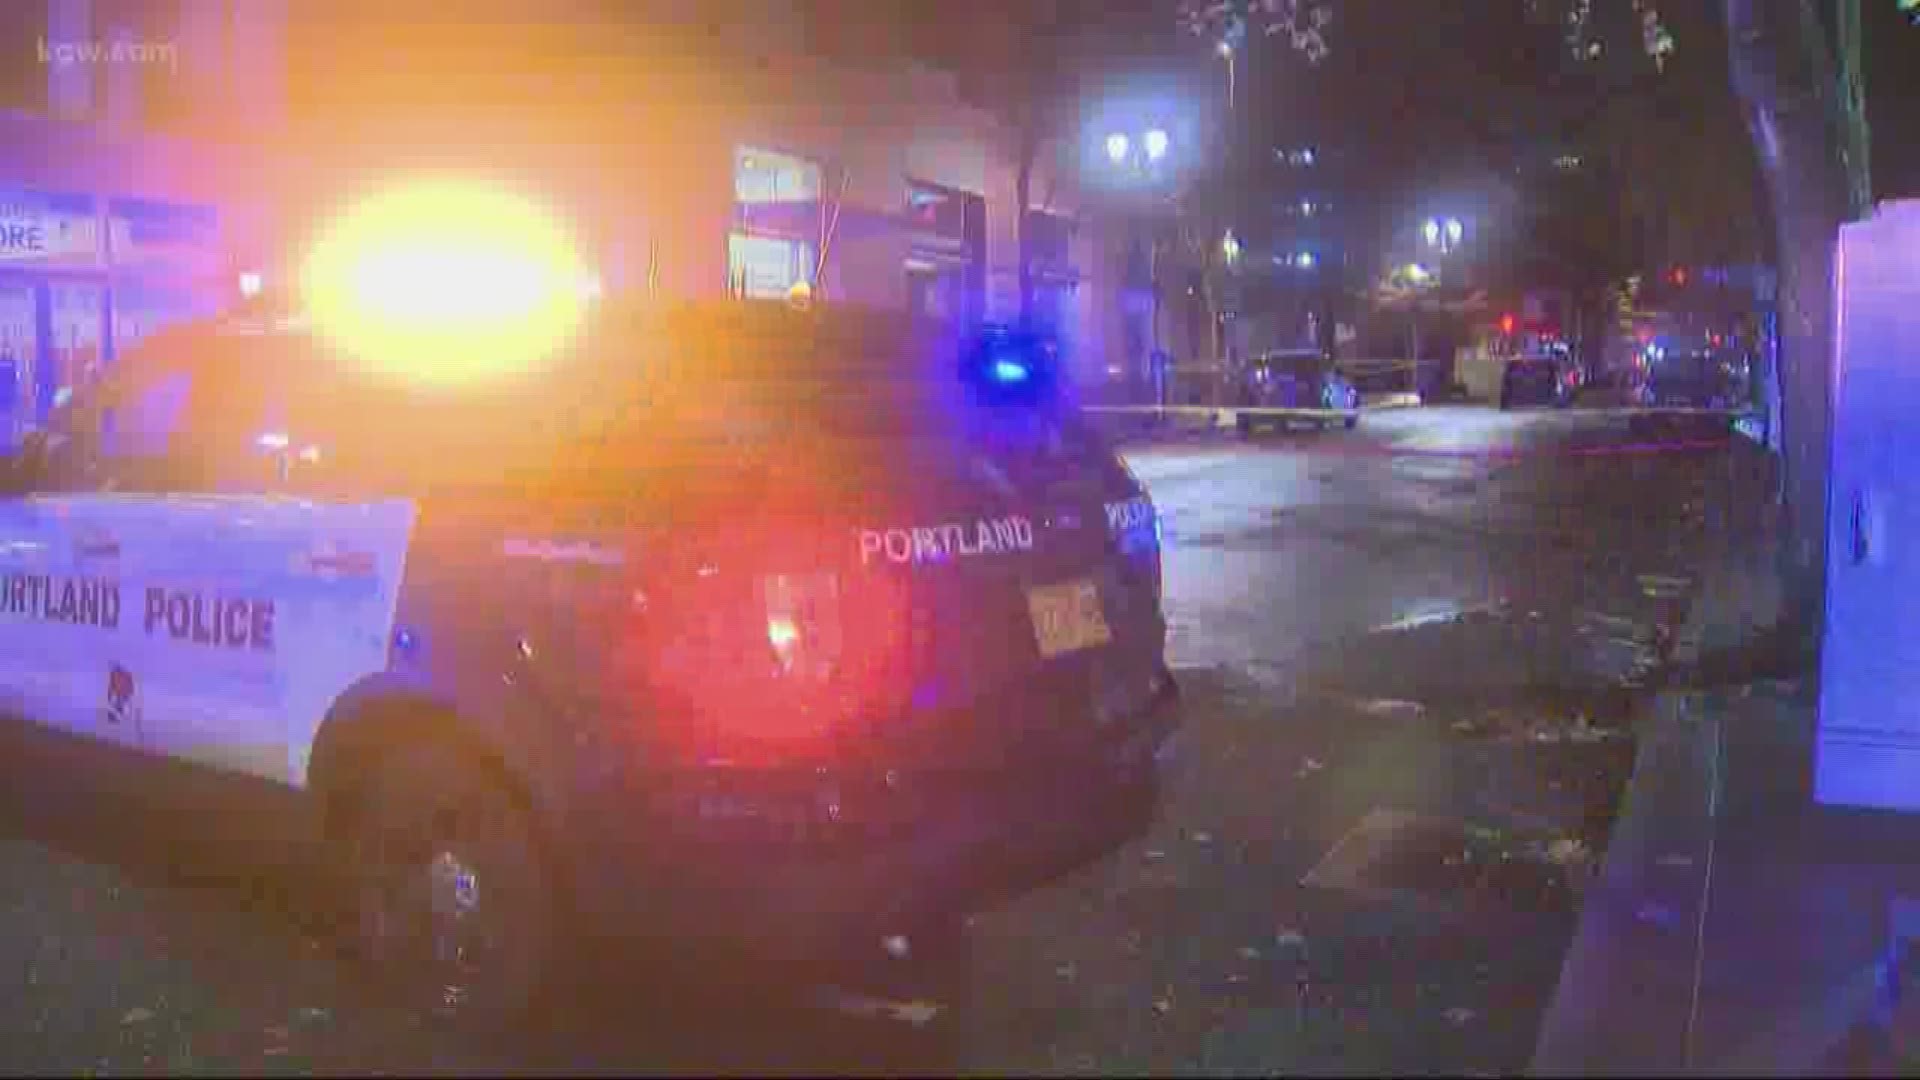 Police say a man has died after suffering some sort of medical event during a welfare check Thursday night in downtown Portland.